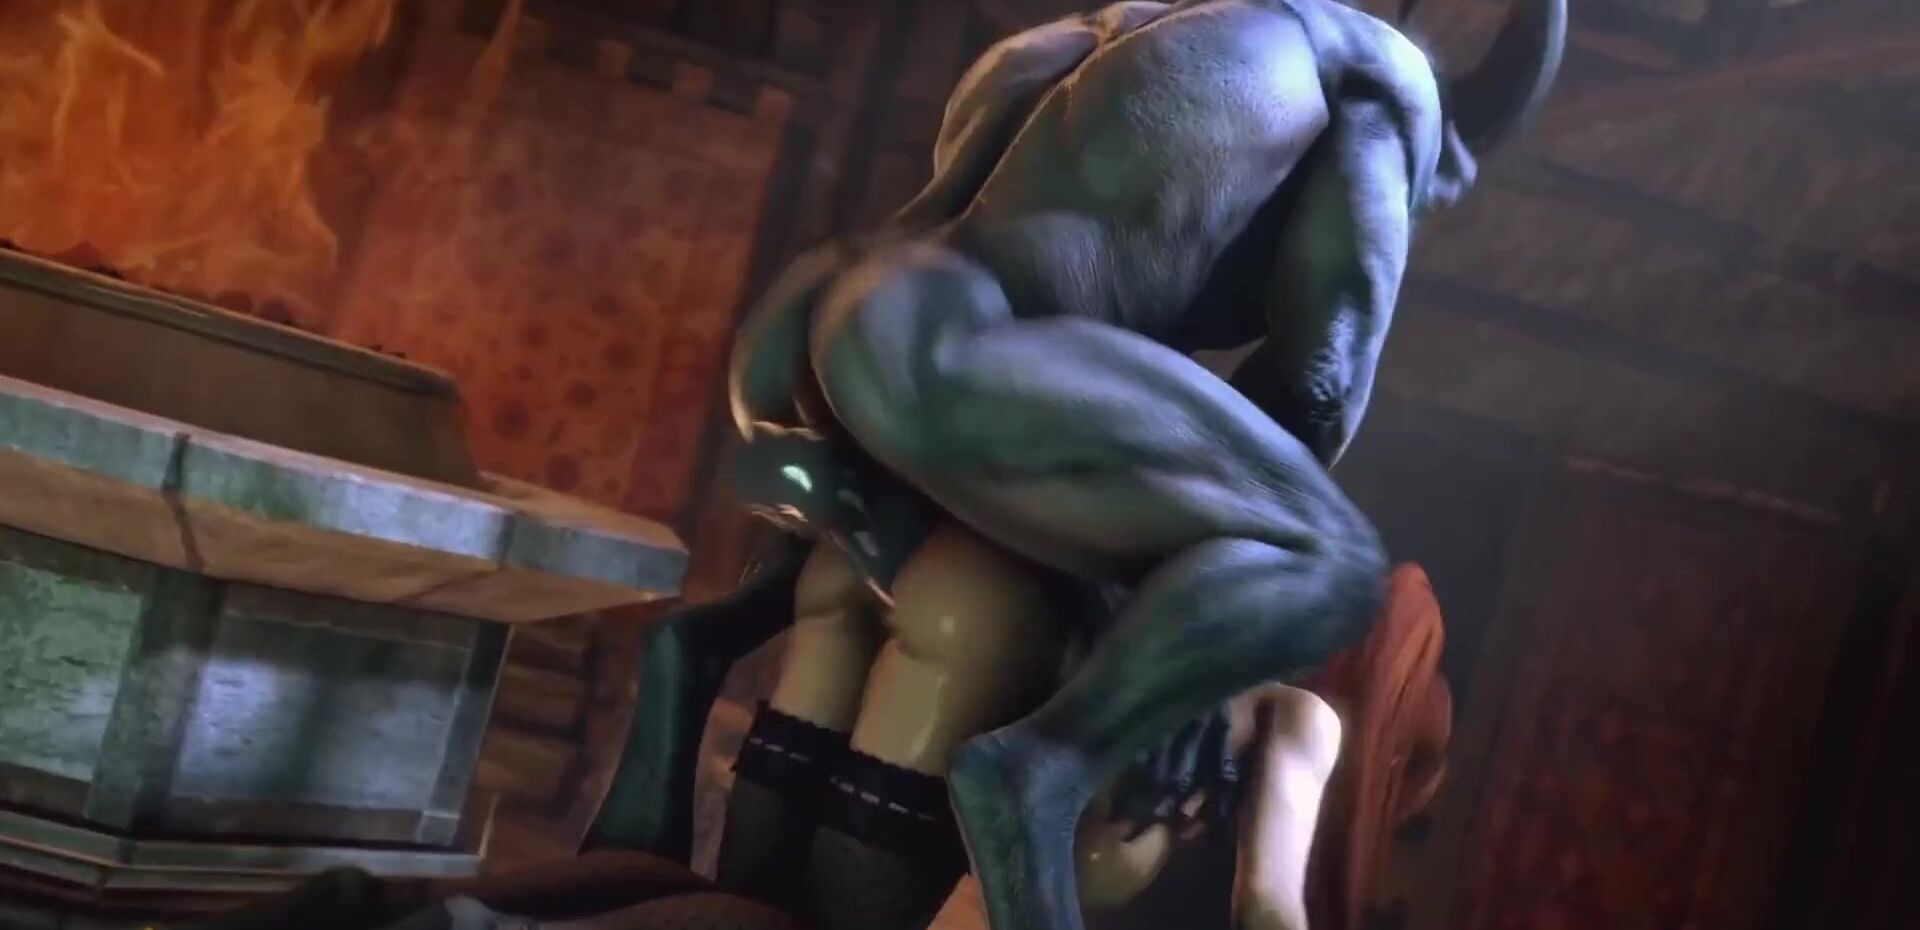 3d Monster Porn Animated Art - Big Monster's Cock Fucks Bitch In Ass, Pussy And Cum On Her Face - 3d  Animated Horror Hardcore Porn Video, Where Monster Fucks Hot Kasumi -  CartoonPorn.com